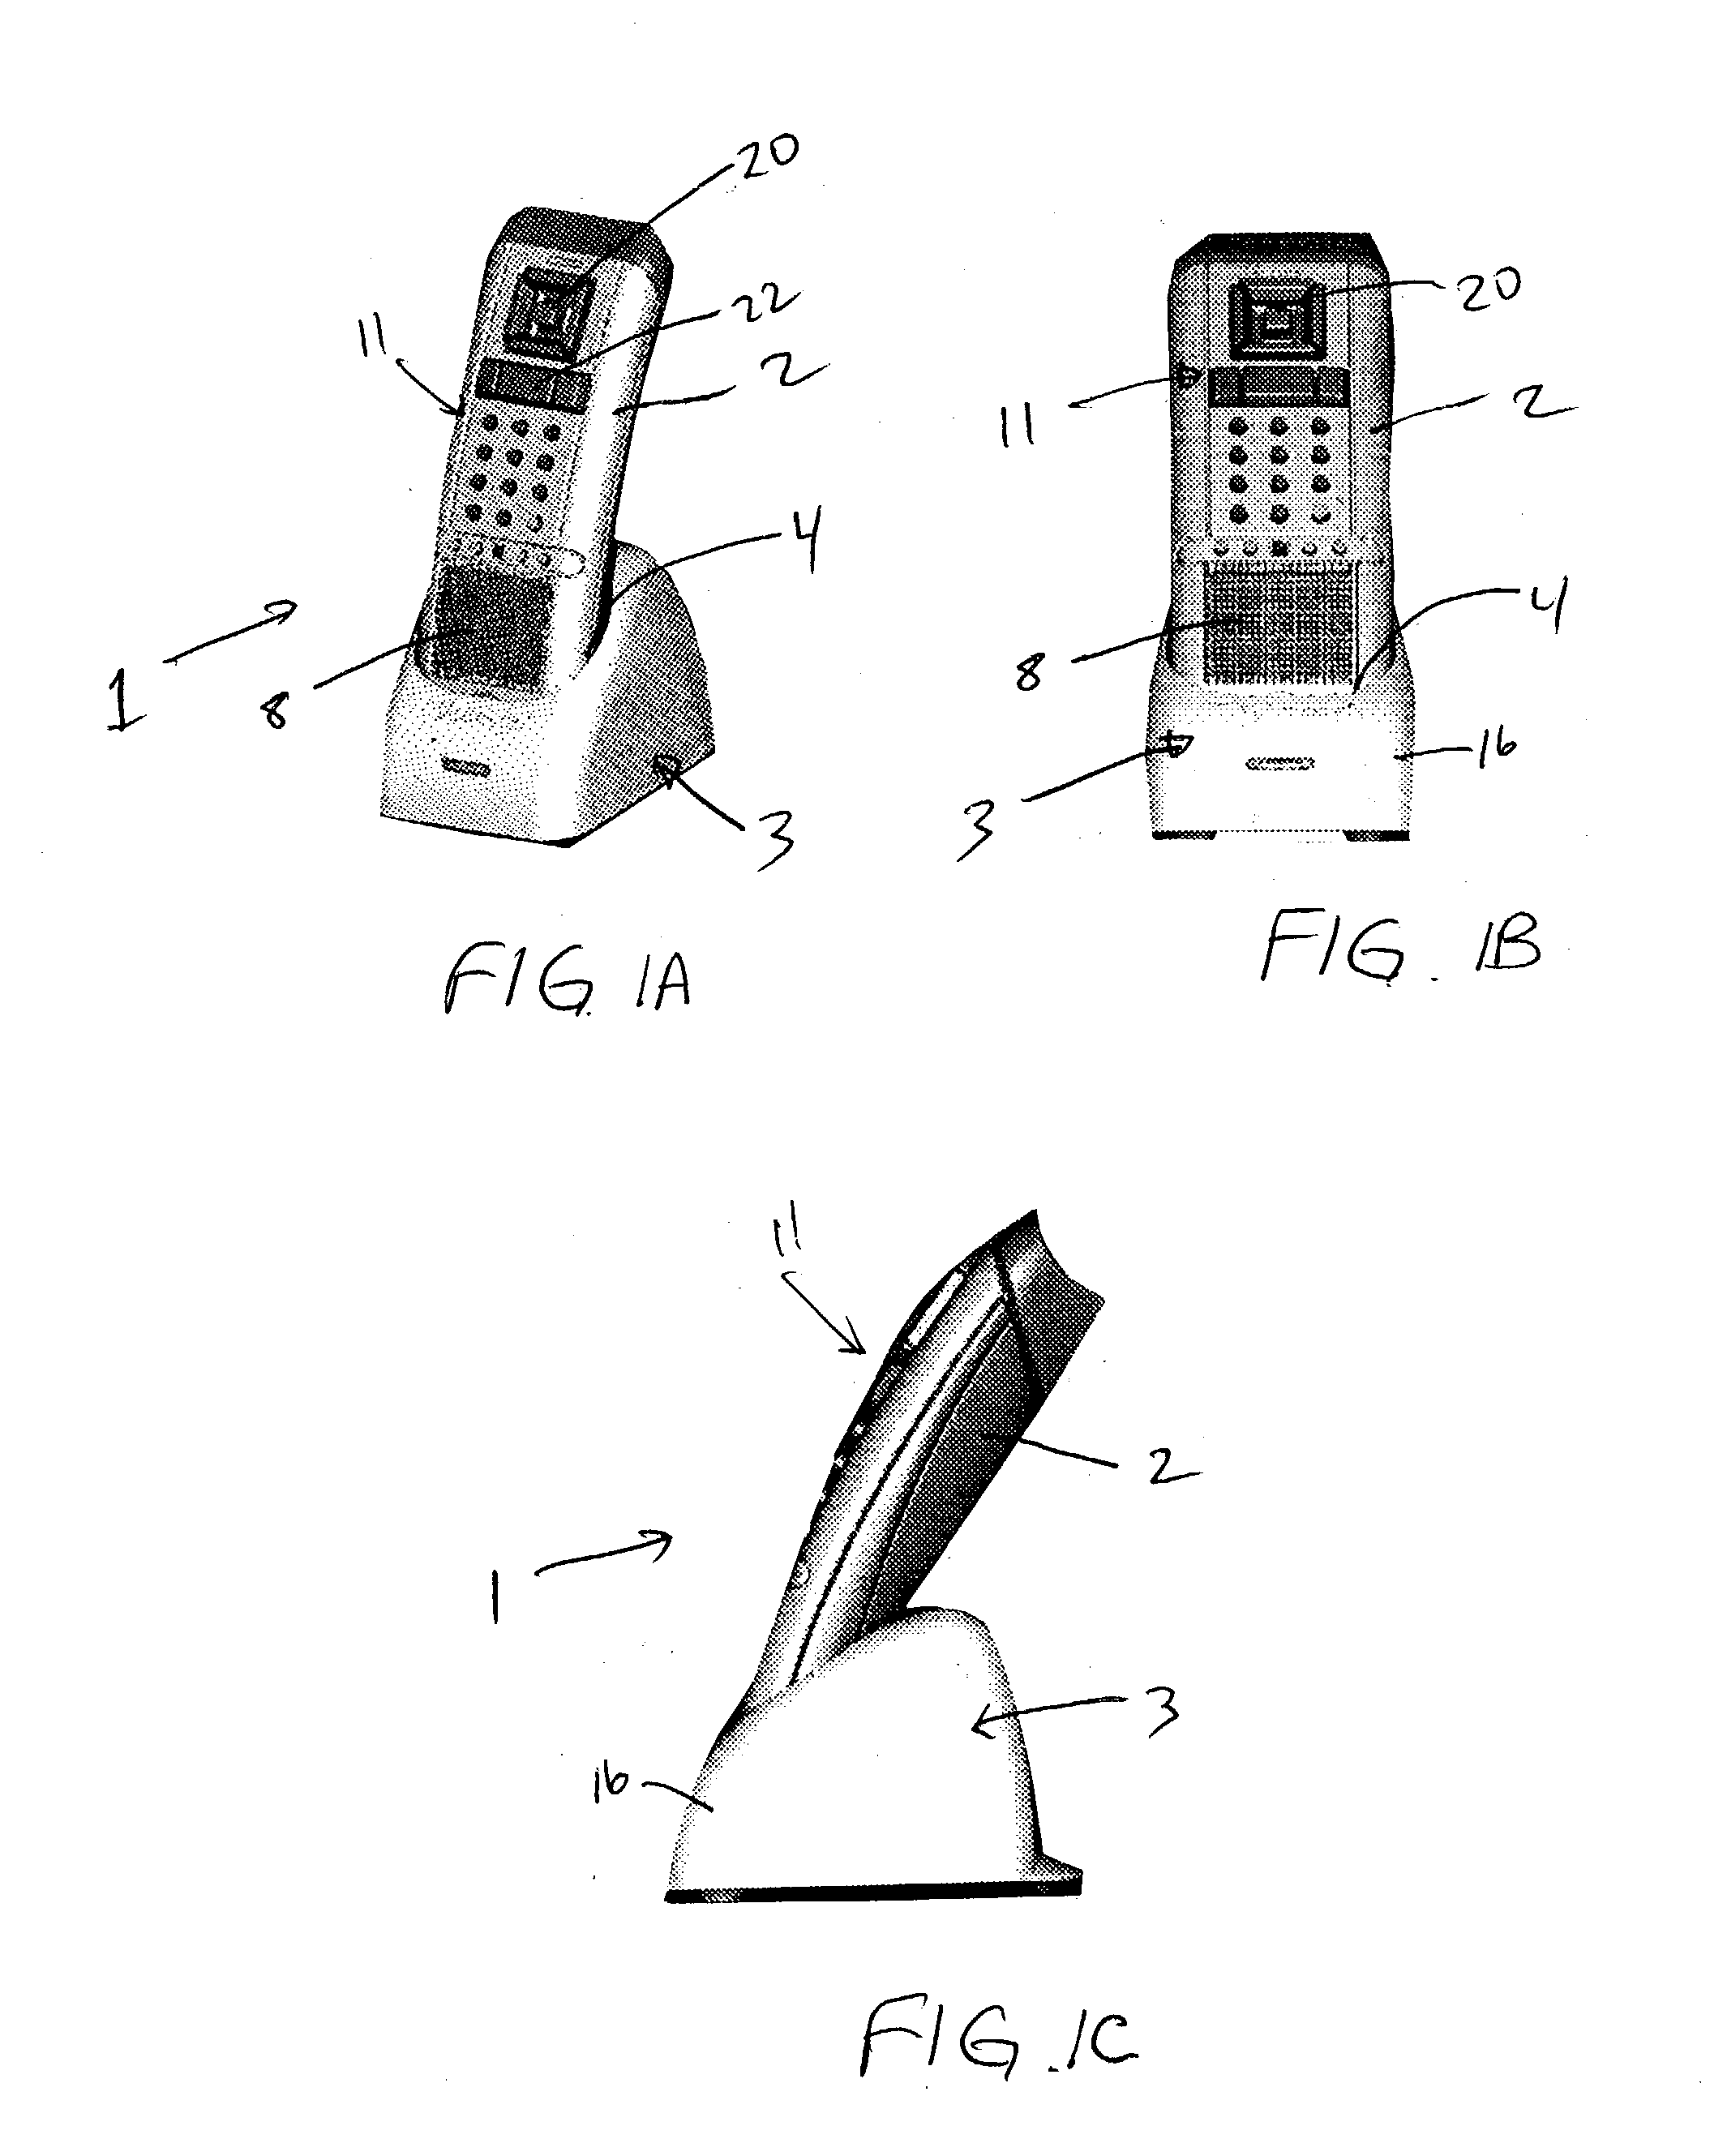 Wireless bar code symbol driven portable data terminal (PDT) system adapted for single handed operation